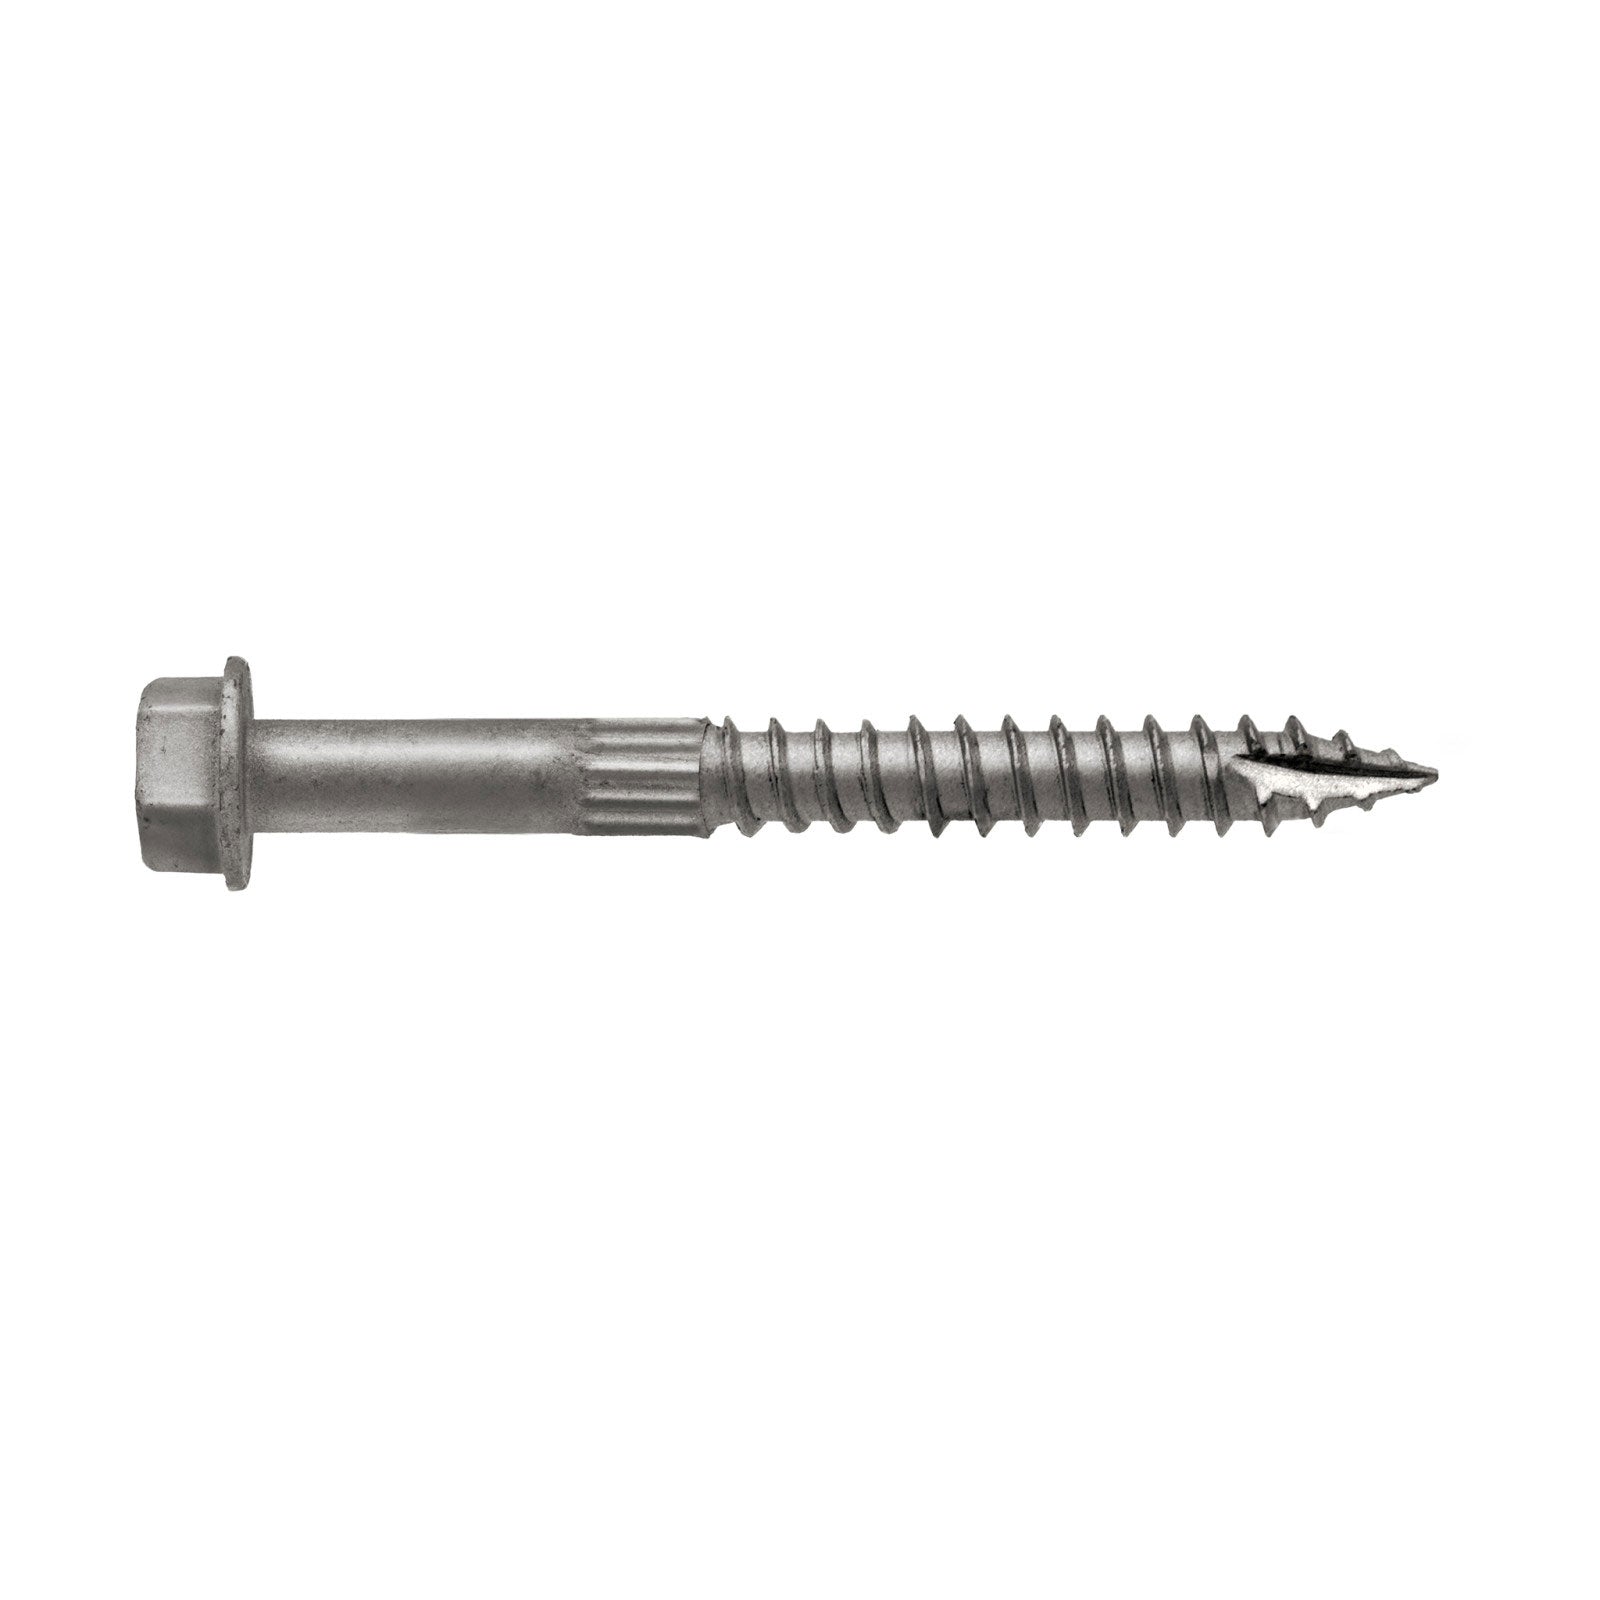 1/4" x 2-1/2" Strong-Tie SDS25212SS Heavy-Duty Connector Screw - 316 Stainless Steel